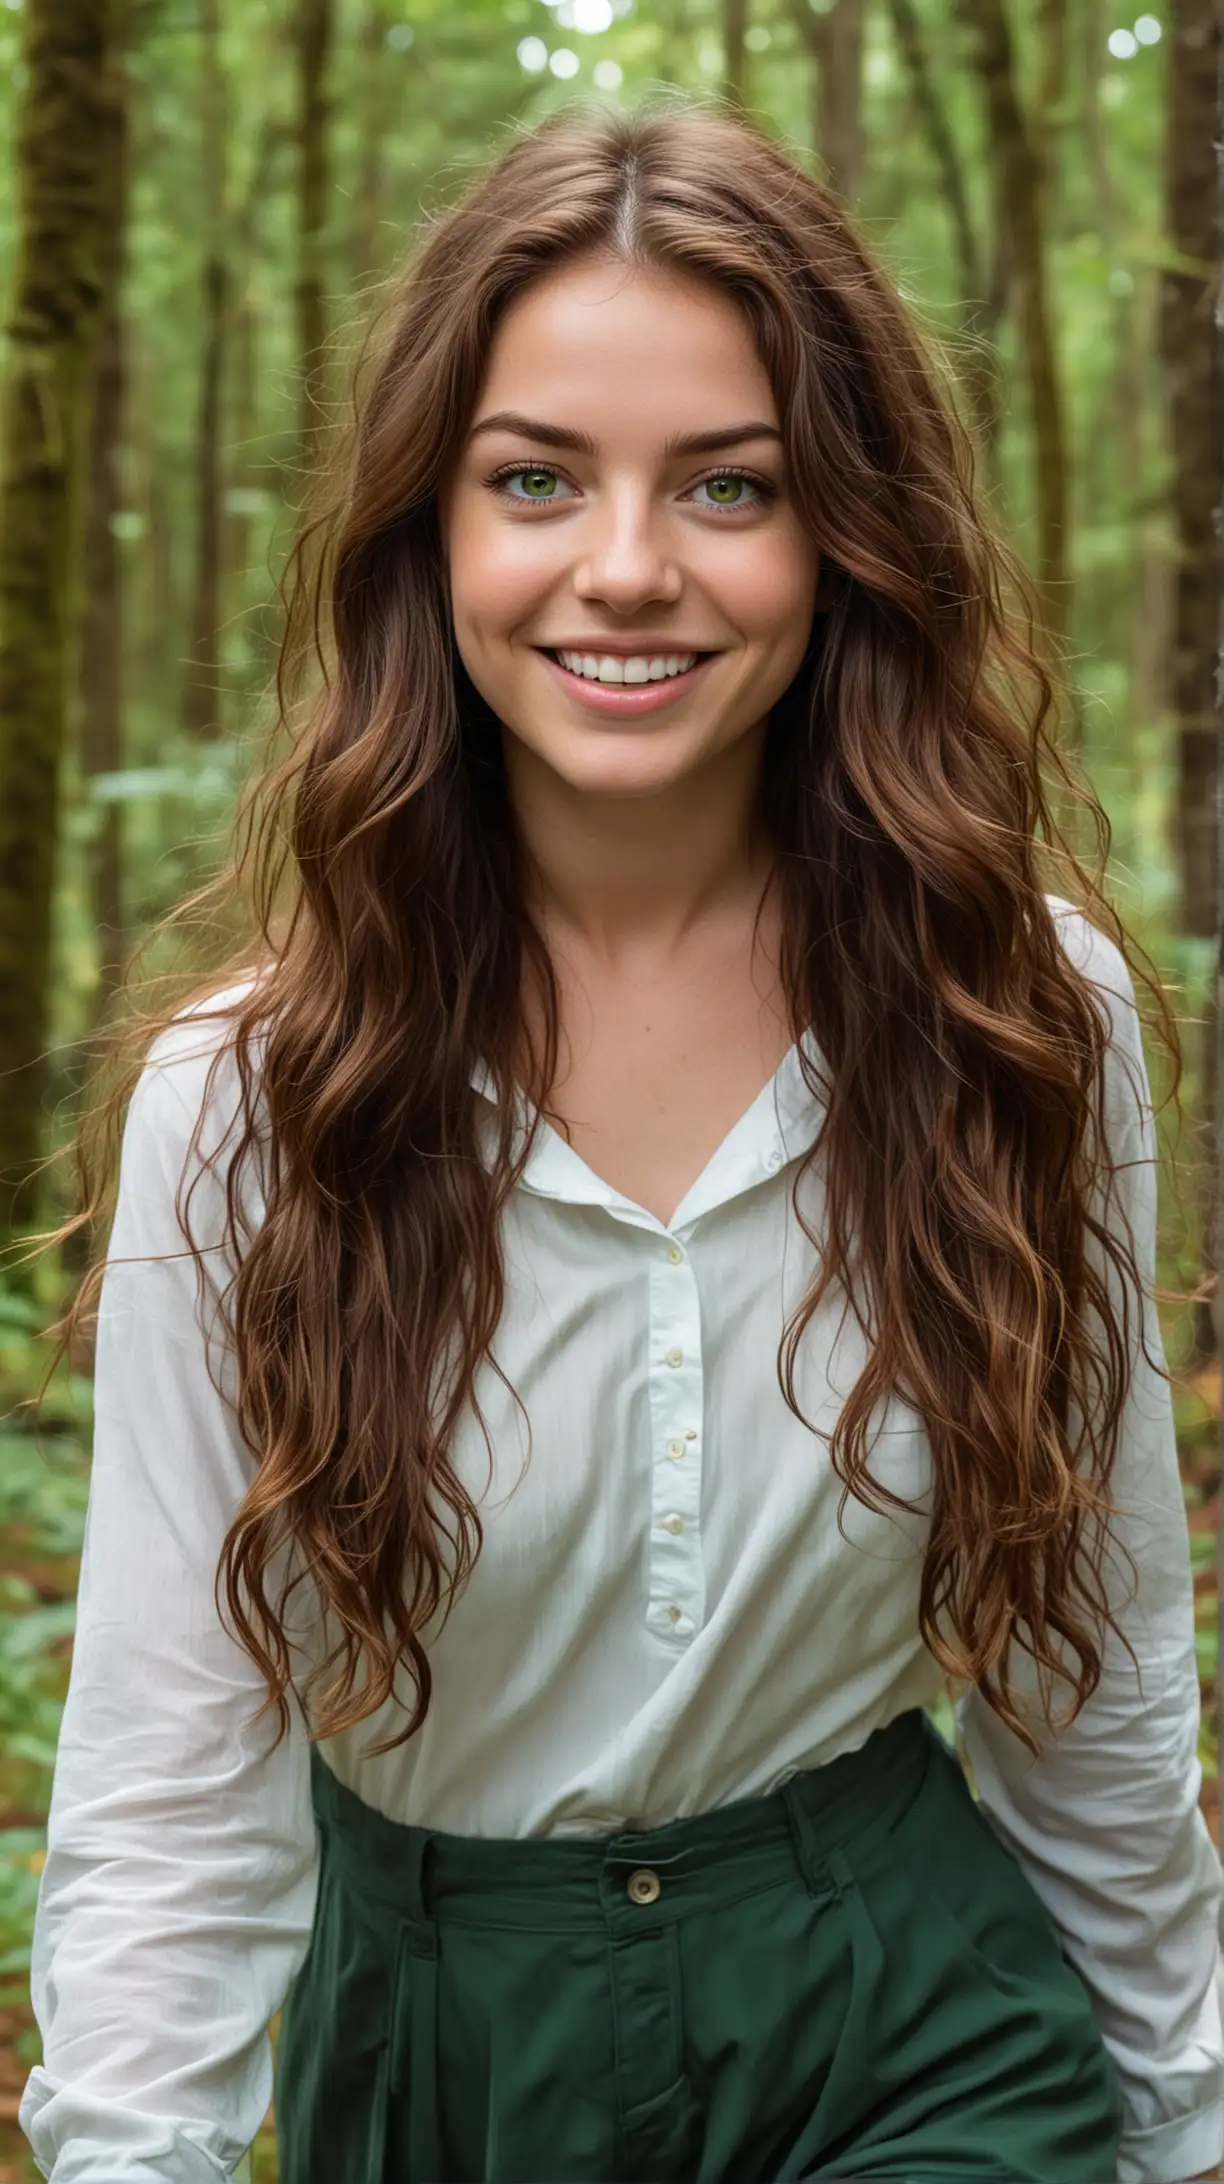 18-year-old girl Julie Roberts with long, wavy, dark-auburn hair, and intense green eyes. She is walking through the forest with a cheeky grin